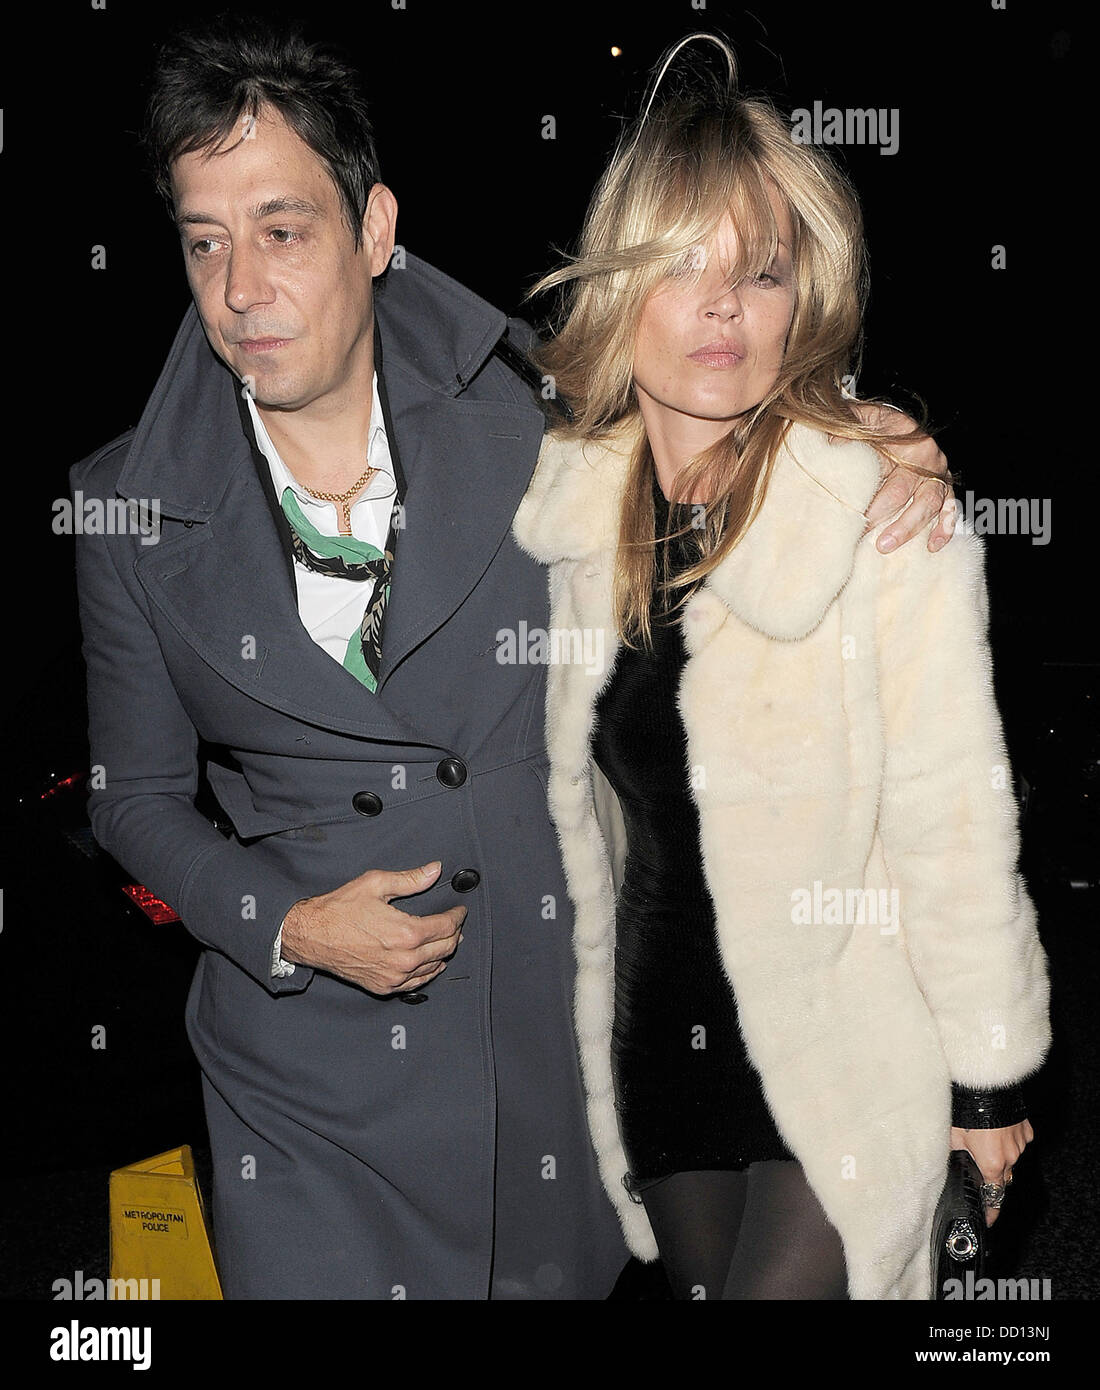 Kate Moss and her husband Jamie Hince celebrate her 38th birthday at China Tang restaurant. London, England - 16.01.12 Stock Photo